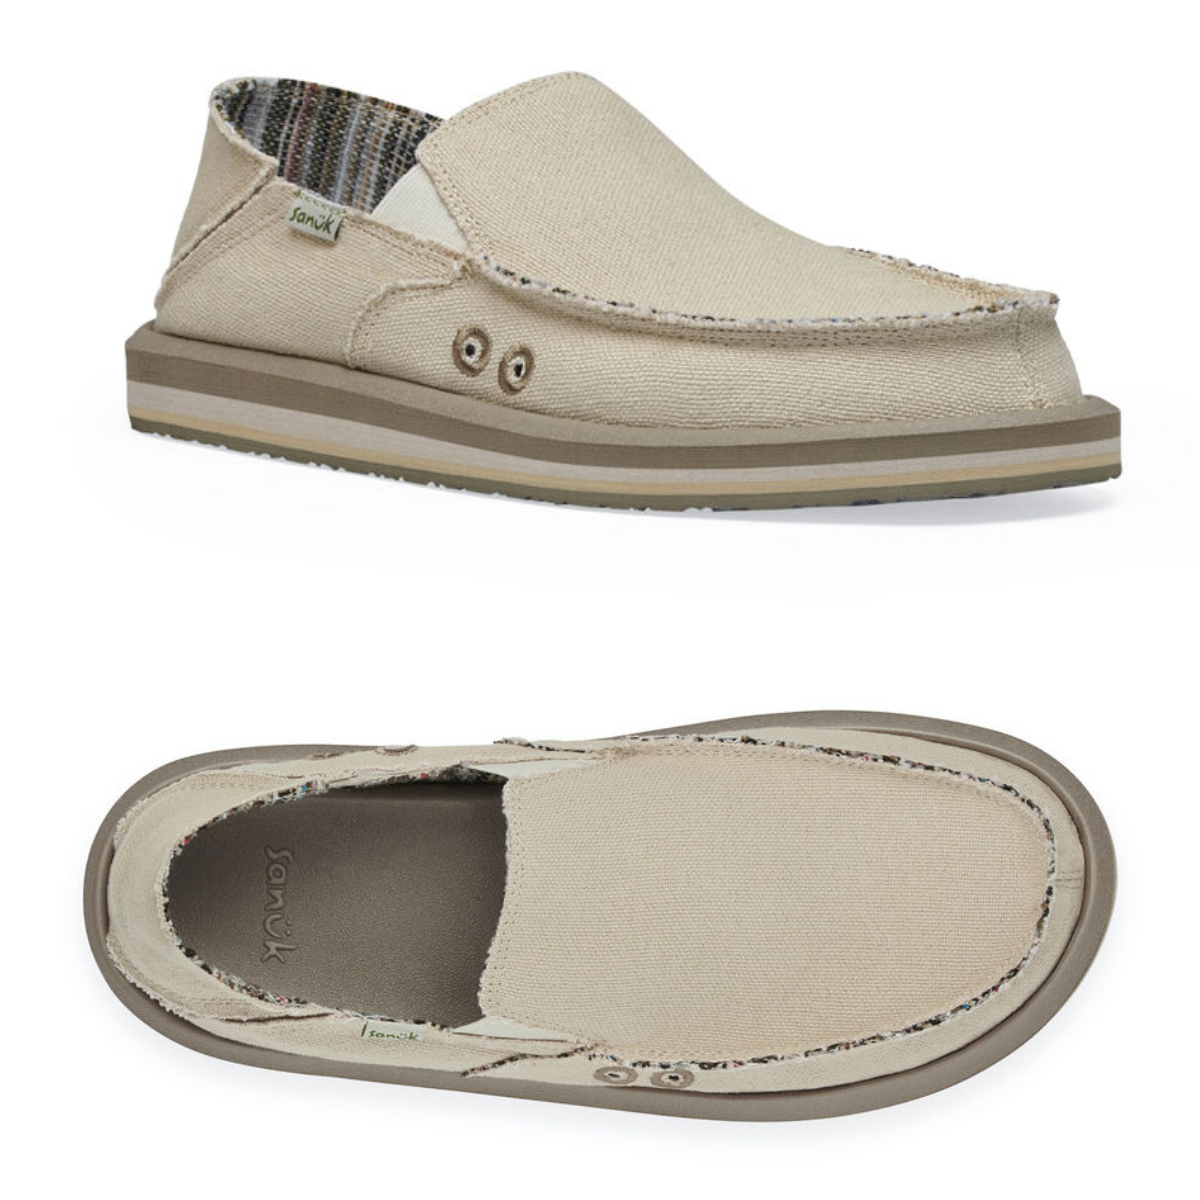 Top and bottom views of a Vagabond Soft Top in Natural canvas slip-on shoe with frayed edges and a rubber sole, featuring hemp blend uppers by SANUK - DECKERS.